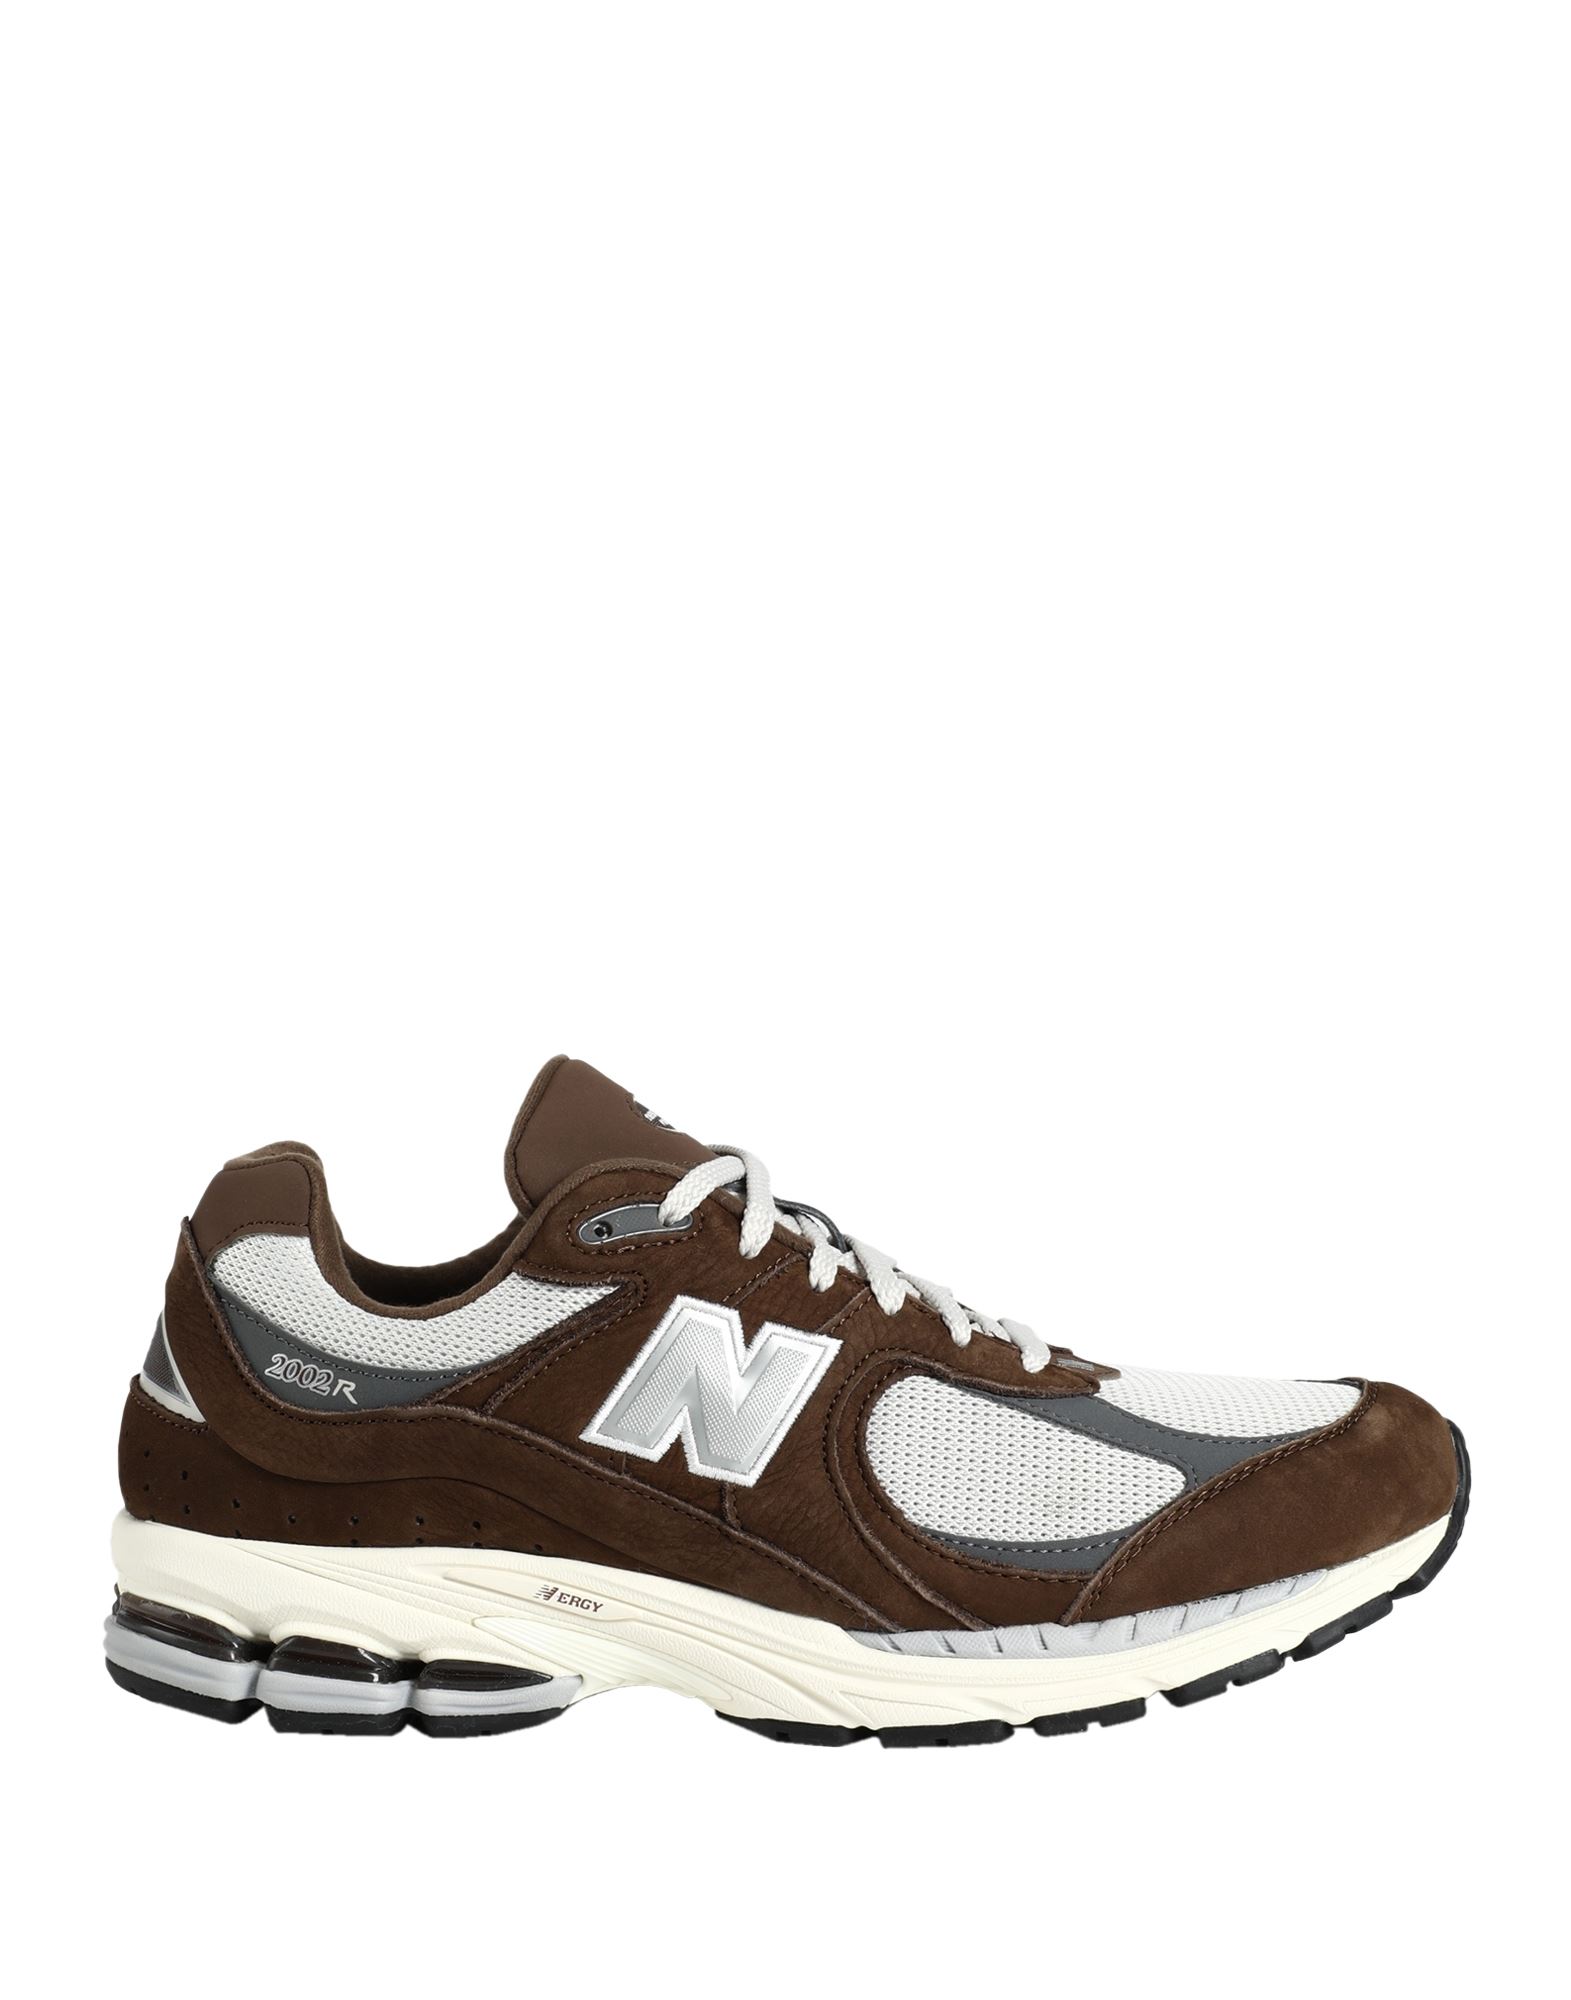 NEW BALANCE NEW BALANCE 2002R MAN SNEAKERS BROWN SIZE 13 SOFT LEATHER, TEXTILE FIBERS